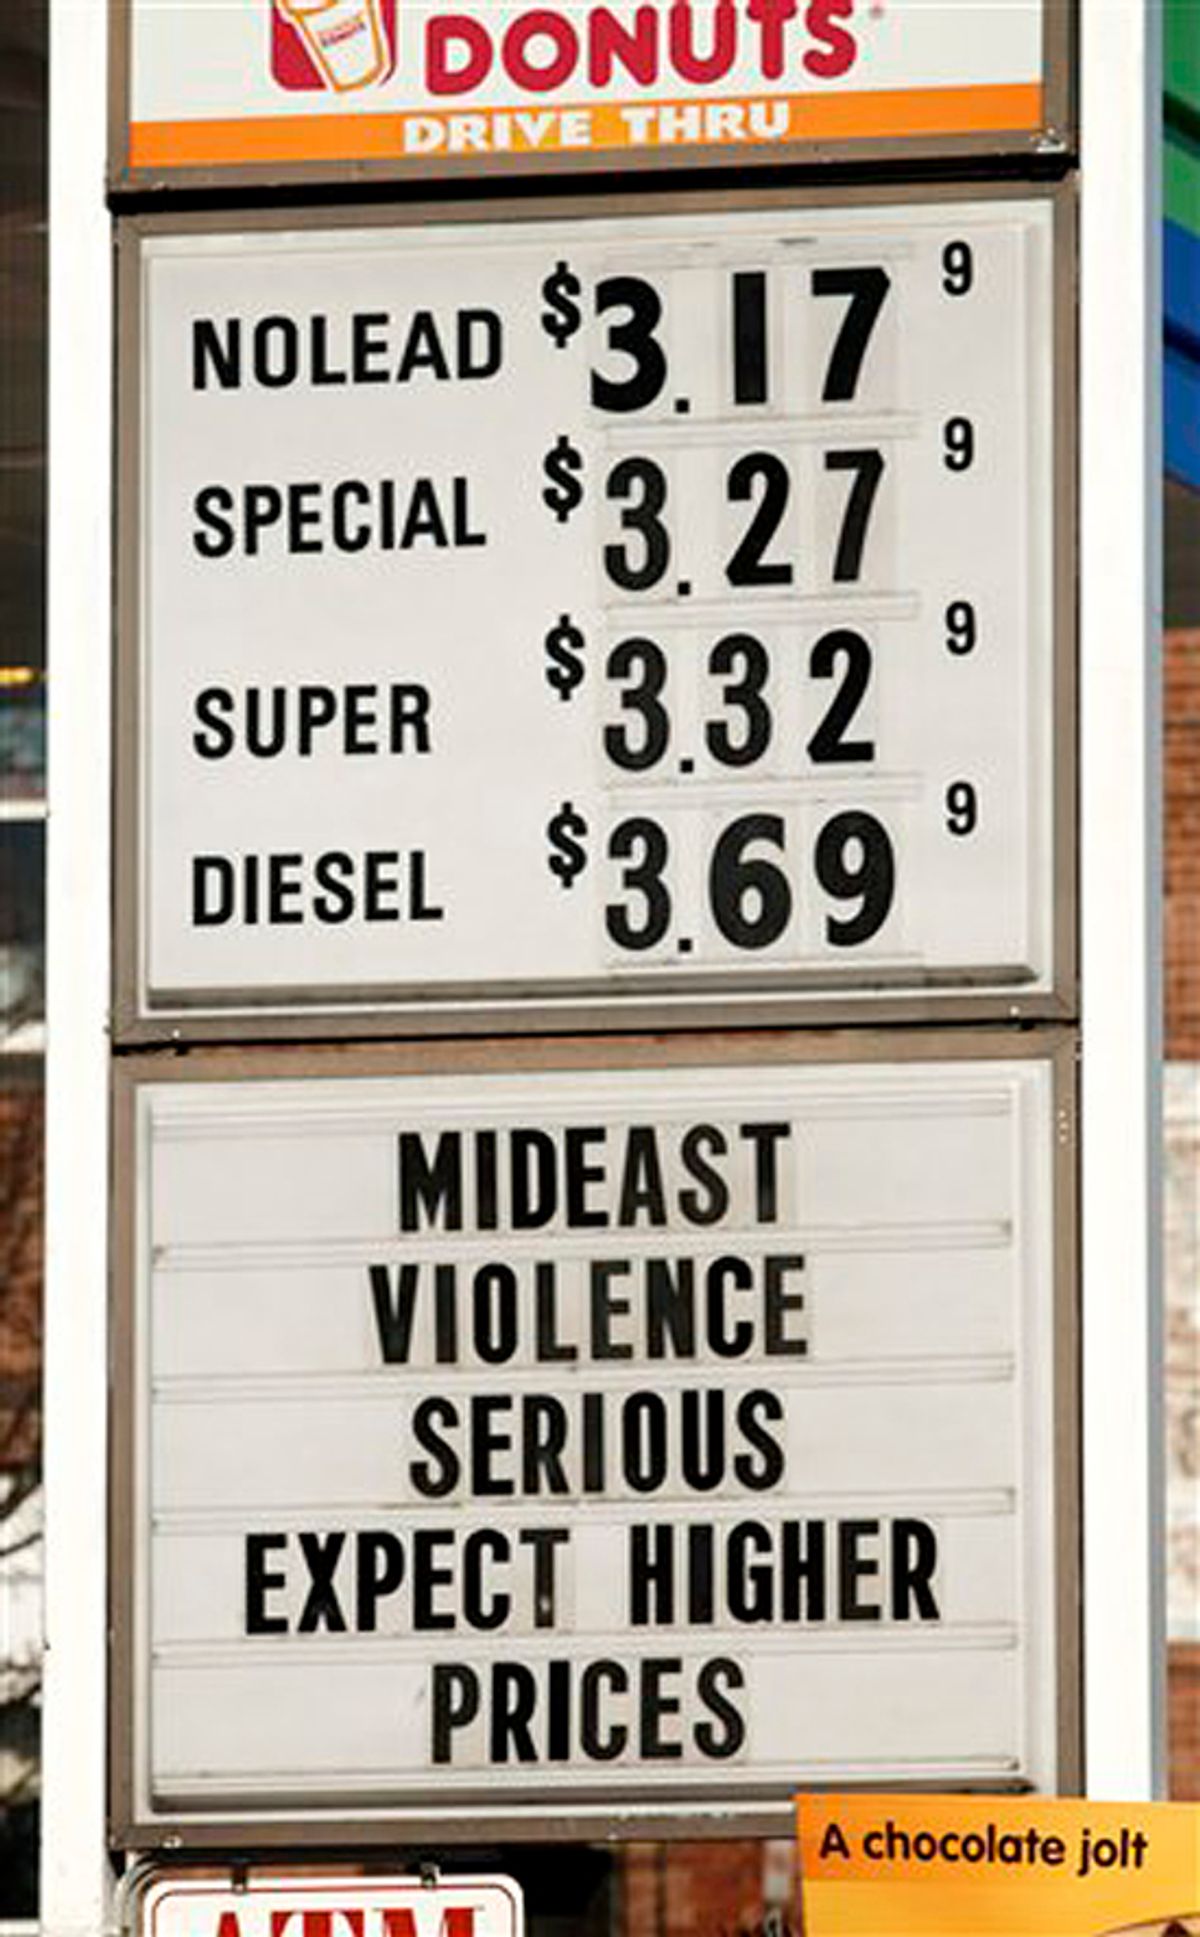 A sign advertises gas and diesel prices, plus gives an explanation to customers, at a service station in Easthampton, Mass, Wednesday, Feb. 23, 2011. Oil prices rose past $99 a barrel on Wednesday as forces loyal to Libya's Moammar Gadhafi clashed with protesters expanding their control over parts of the country. (AP Photo/ Shana Sureck)  (Shana Sureck)